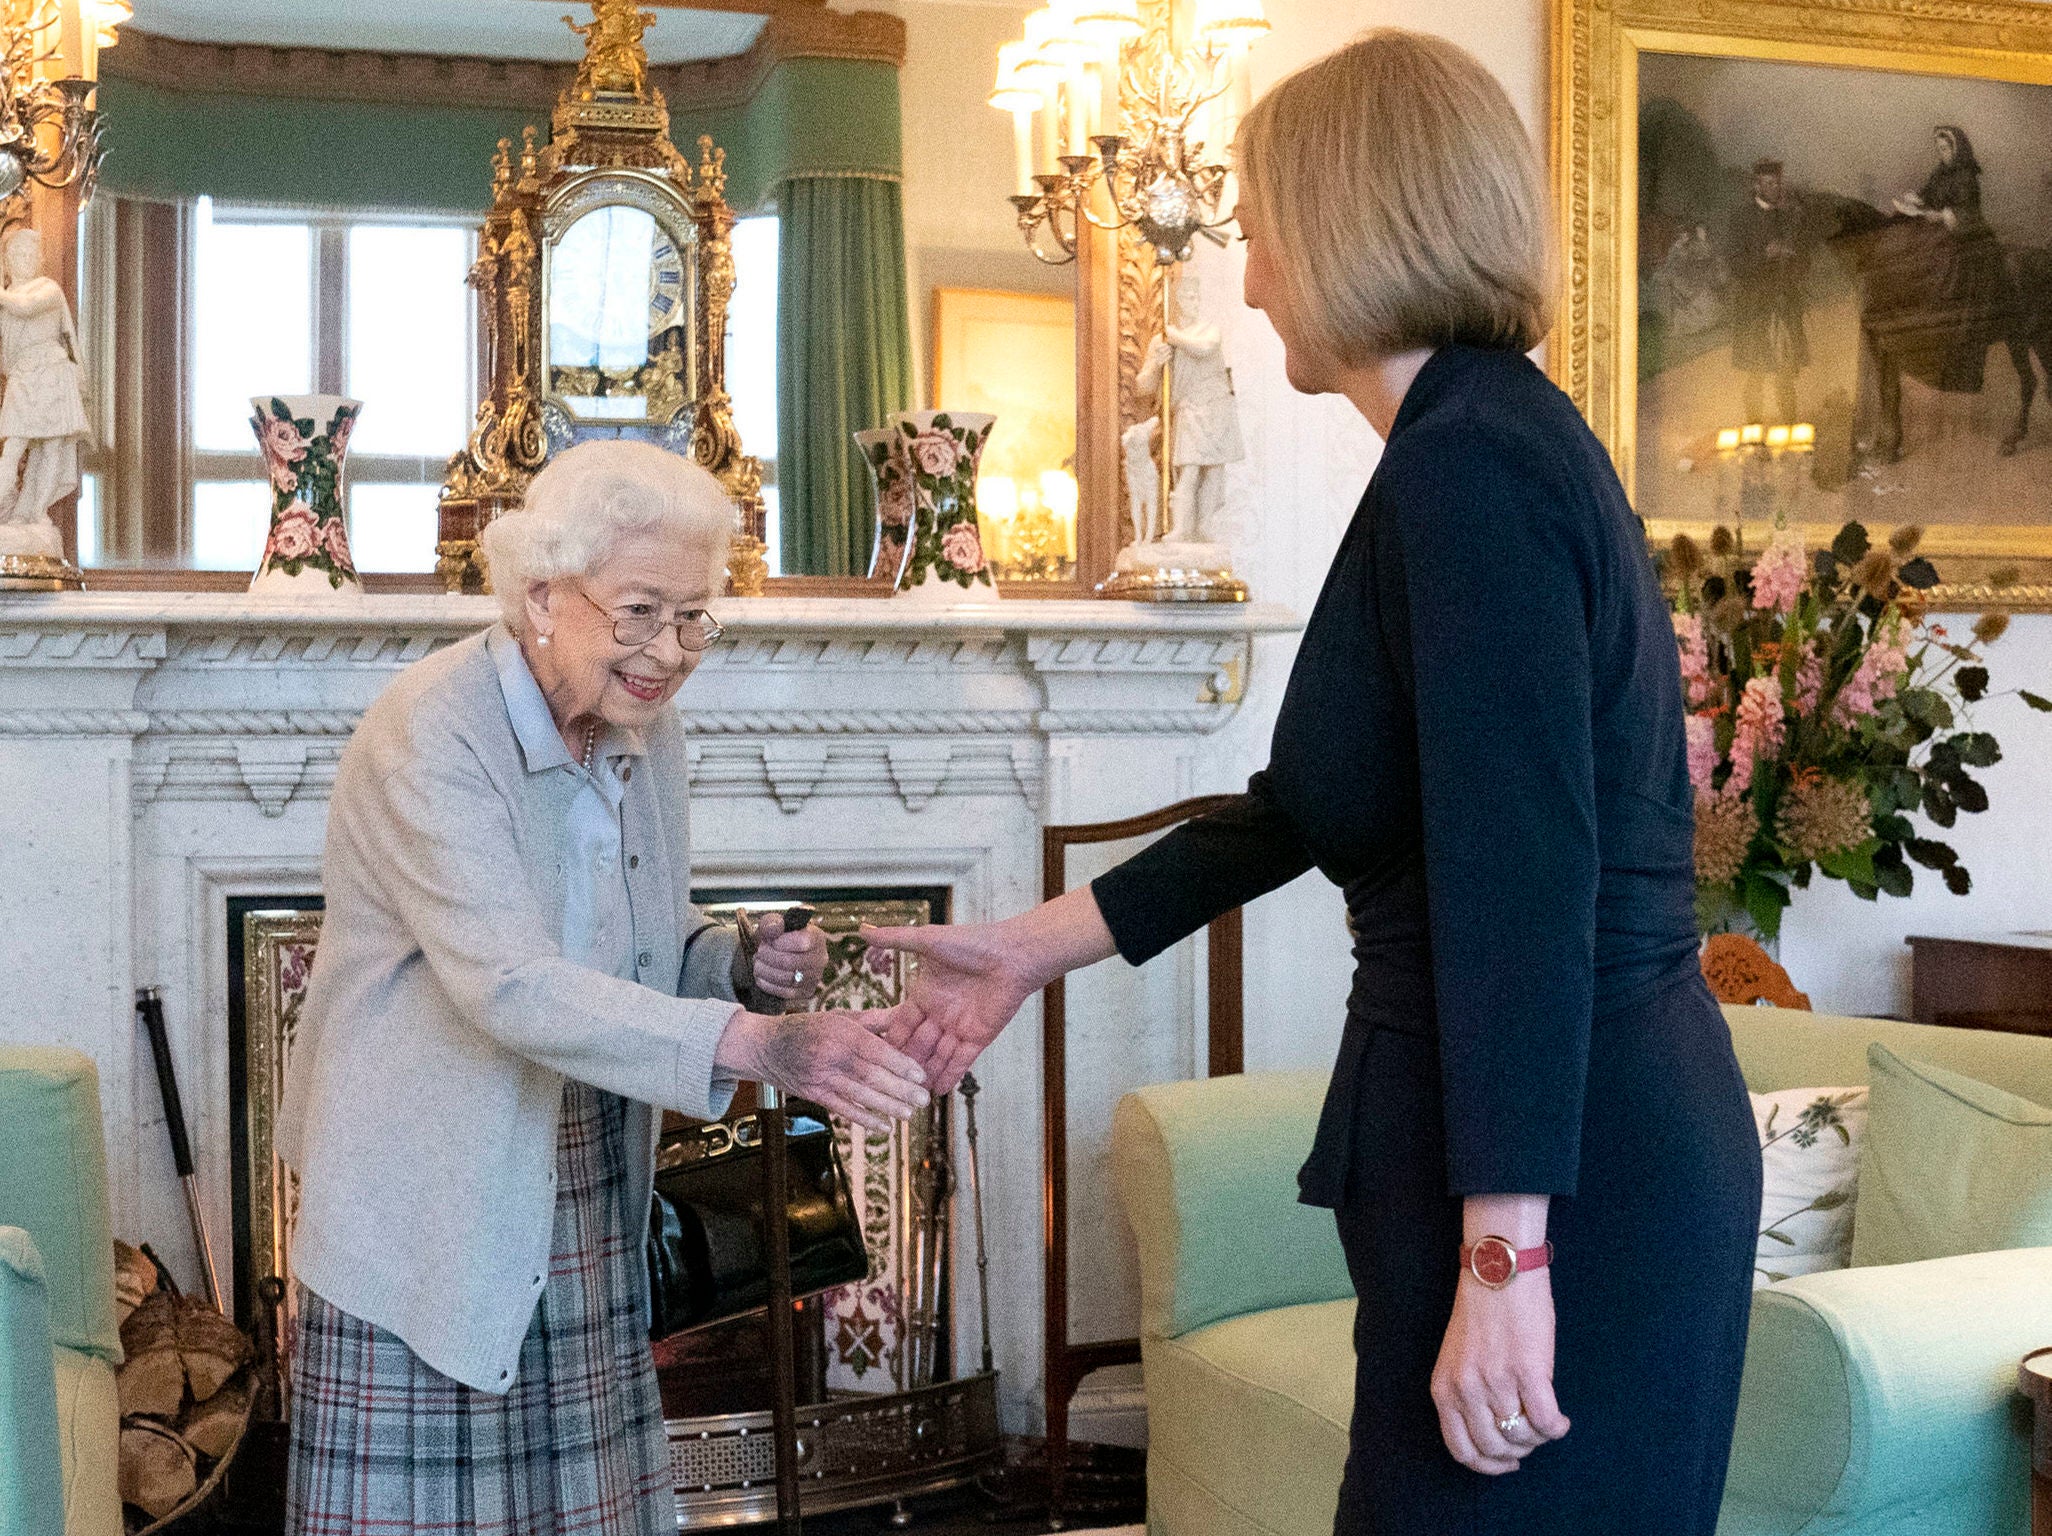 The Queen told Liz Truss they would be meeting again - two days before her death